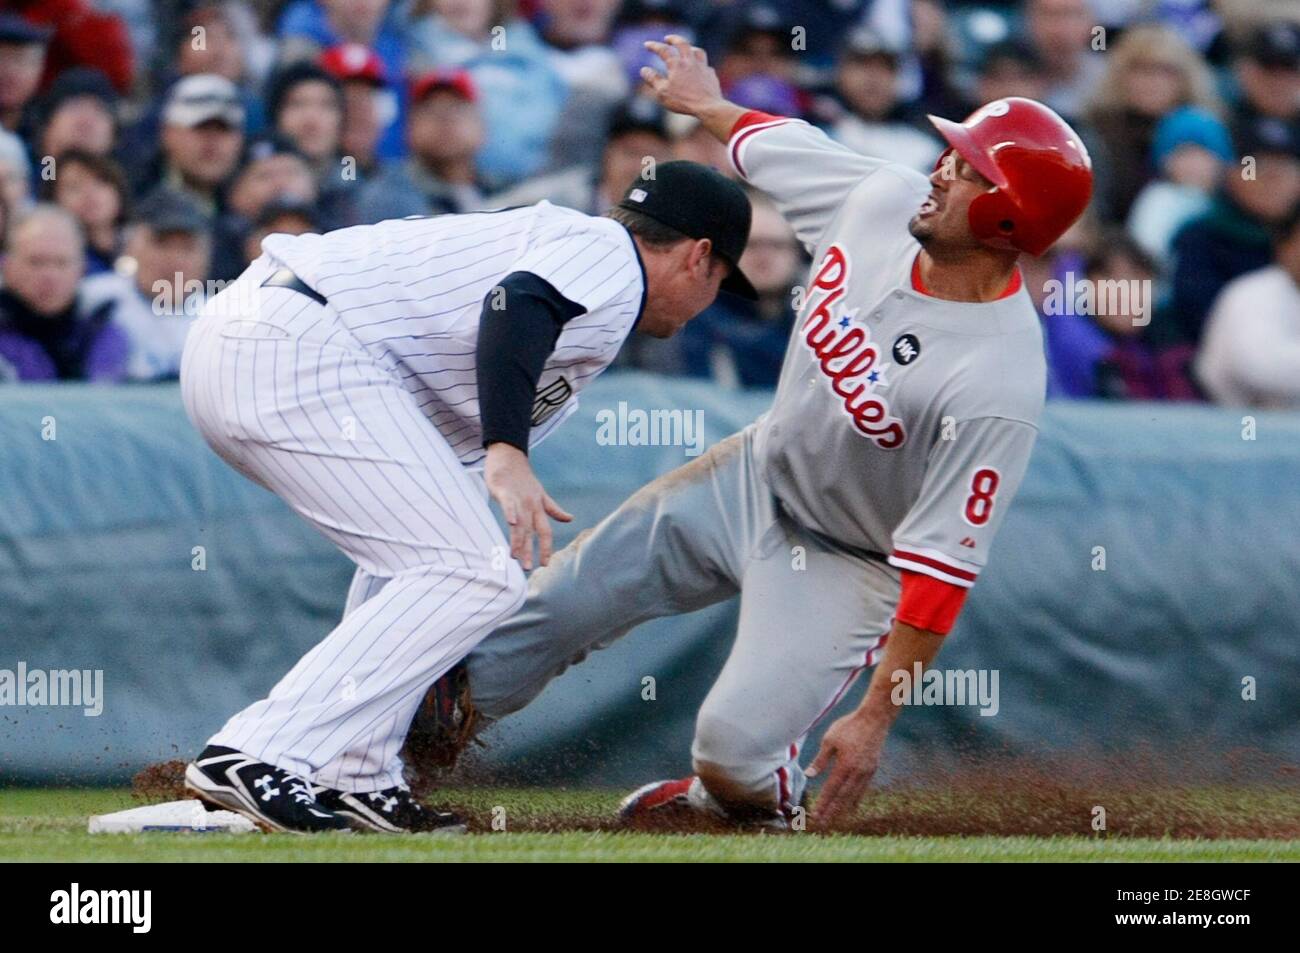 Philadelphia Phillies' Shane Victorino slides safely into third base under the tag of Colorado Rockies Garrett Atkins during the third inning of their MLB National League Division Series playoff baseball game in Denver, October 12, 2009. REUTERS/Rick Wilking (UNITED STATES SPORT BASEBALL) Stock Photo